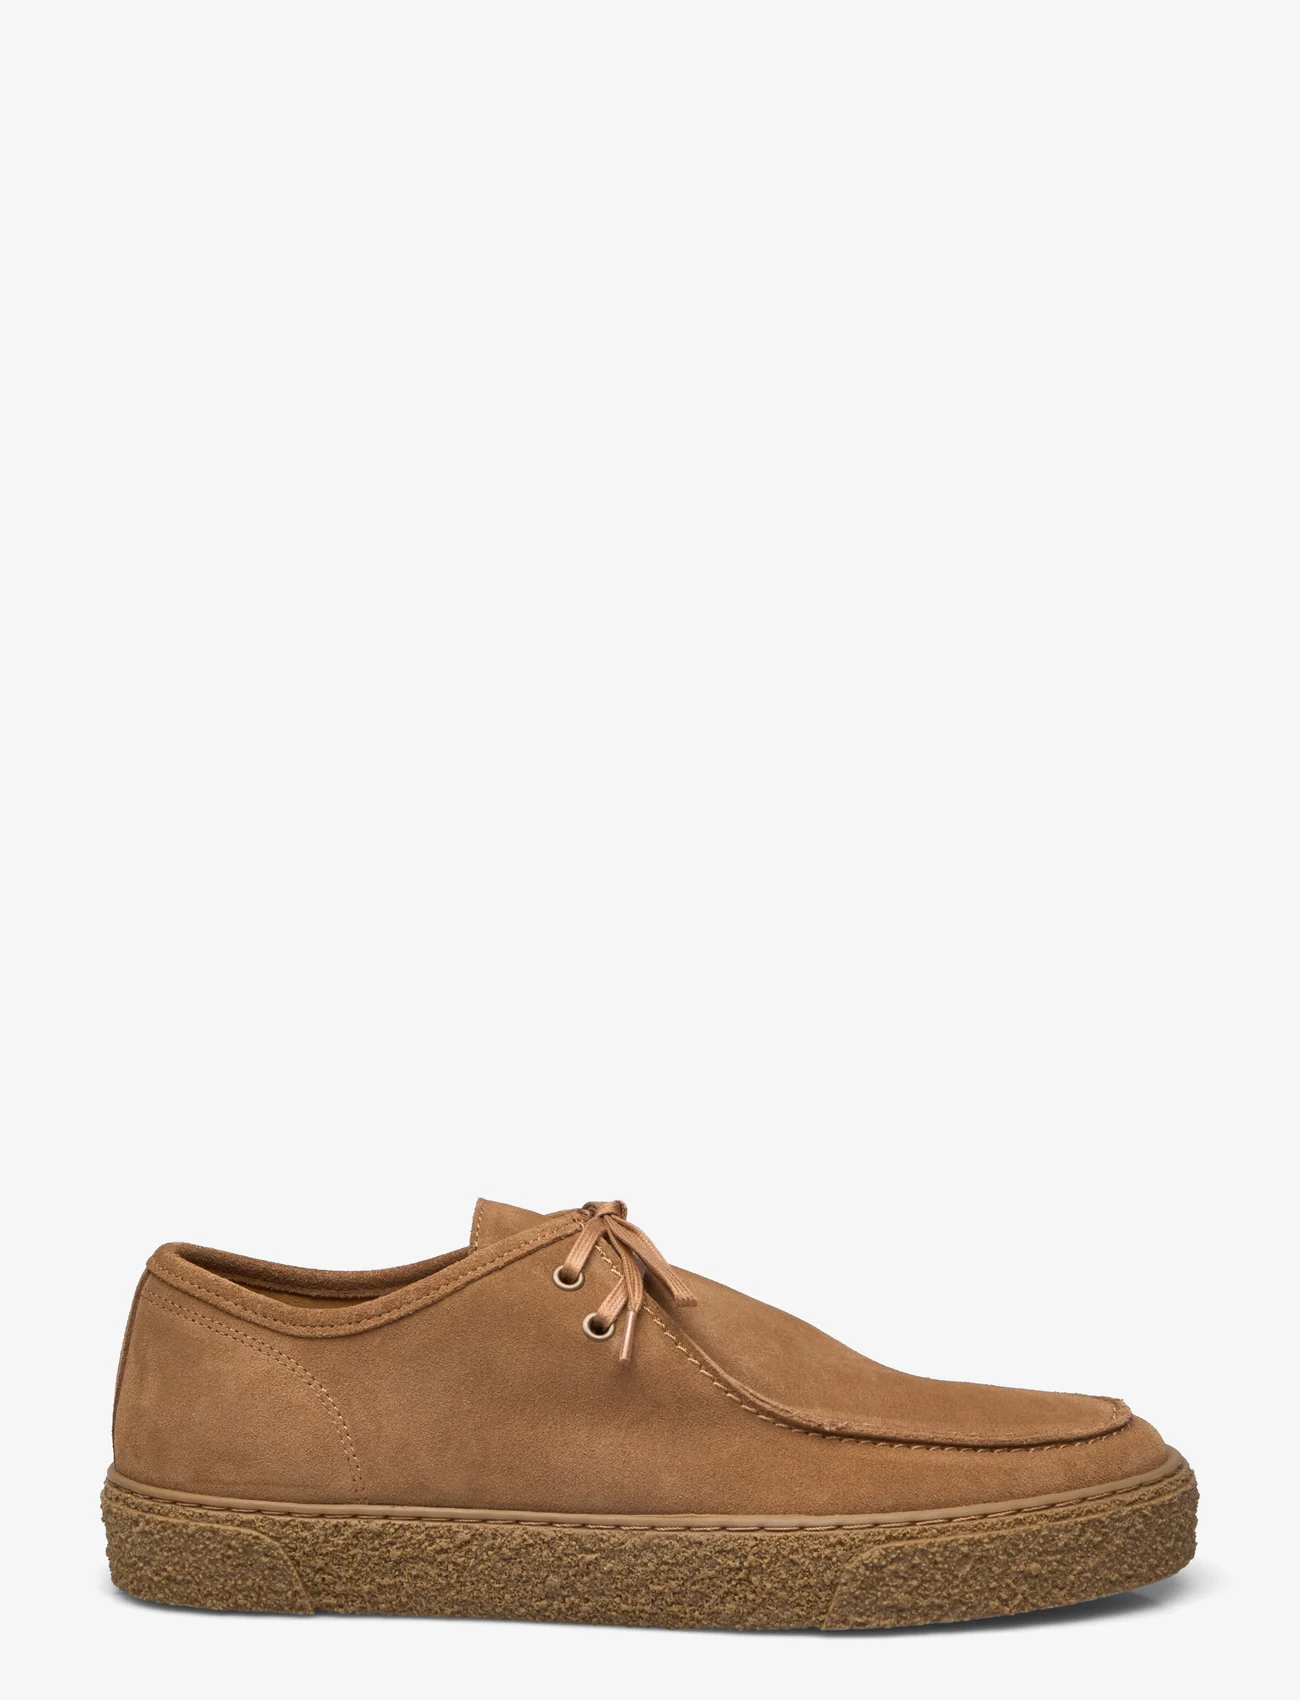 Bianco - BIACHAD Loafer Suede - spring shoes - tan/tan - 1